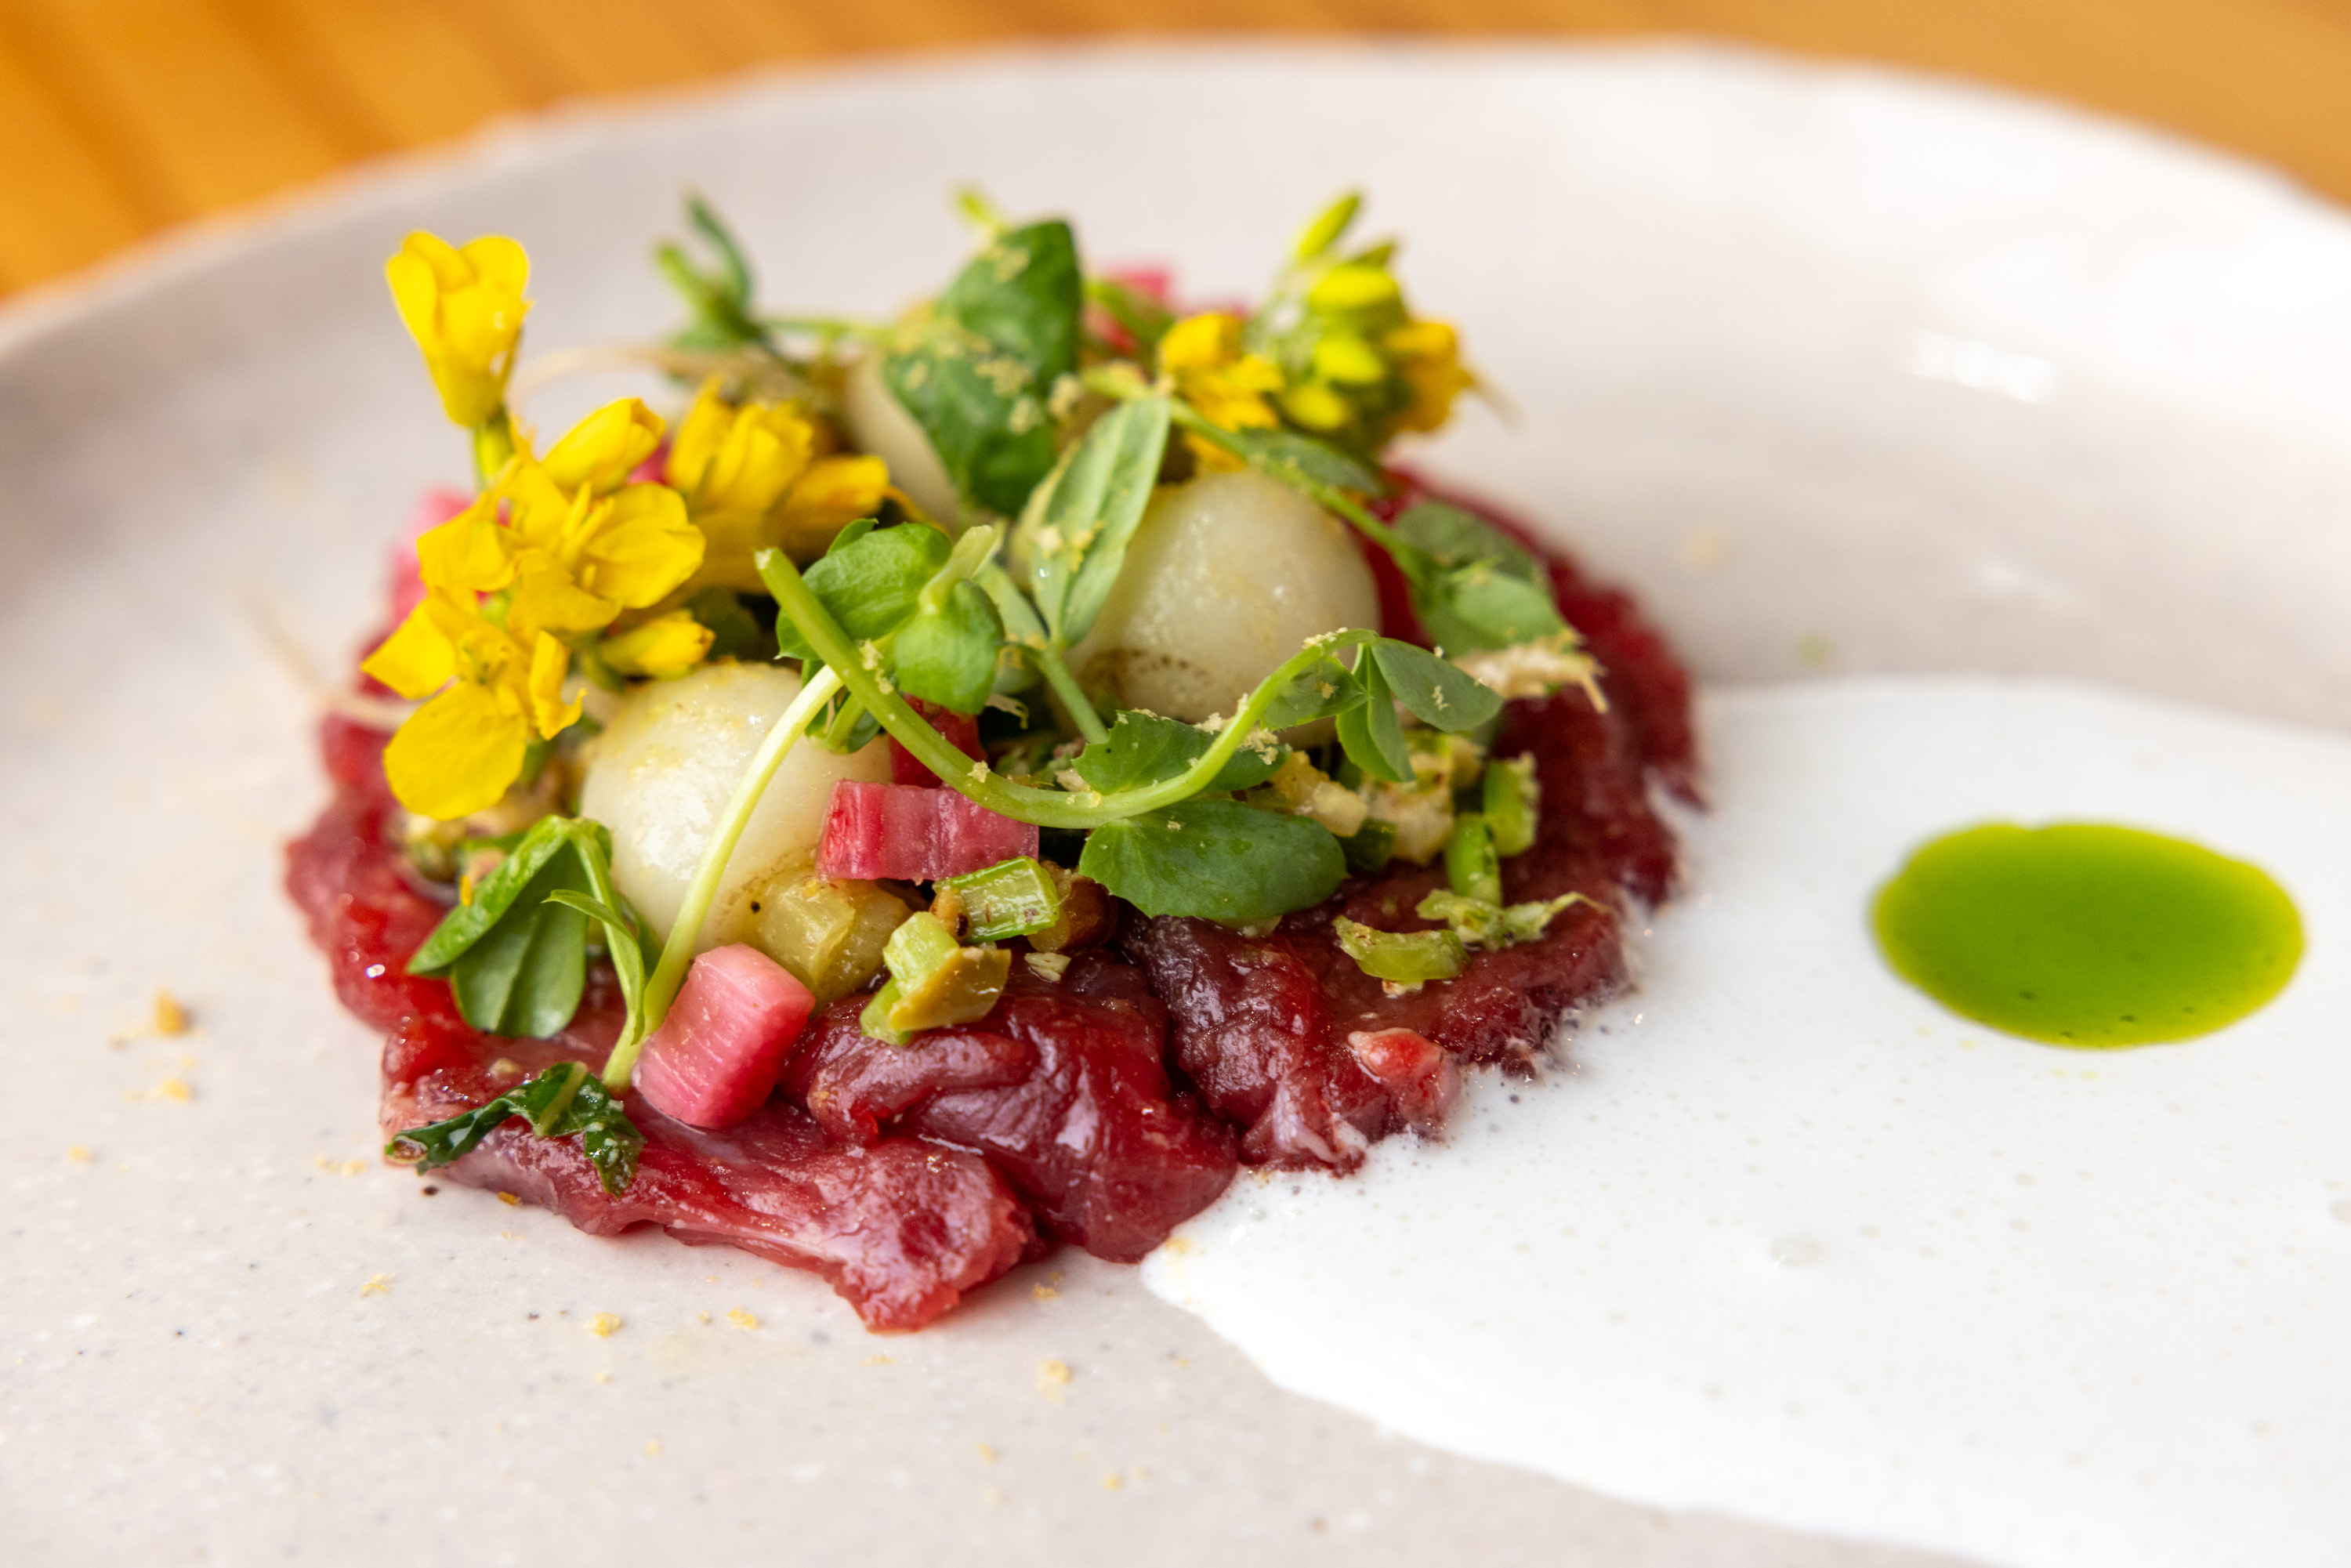 A plate of beef tartare topped with green apple, herbs, edible flowers, and rhubarb, with a drizzle of green sauce.